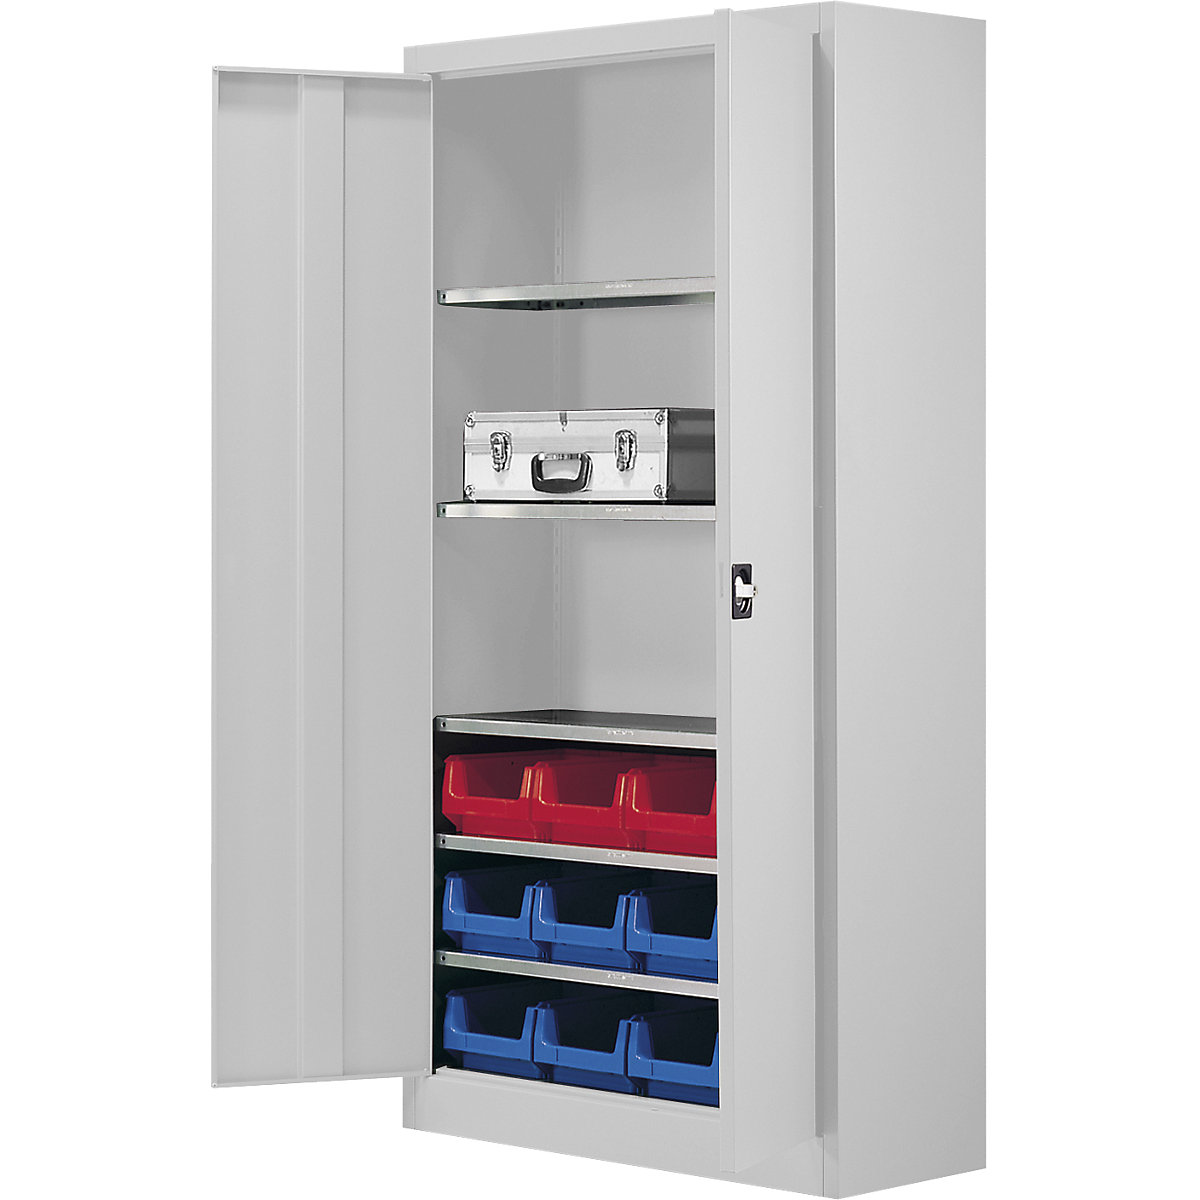 Storage cupboard, single colour – mauser, with 12 open fronted storage bins, 5 shelves, grey, 3+ items-1